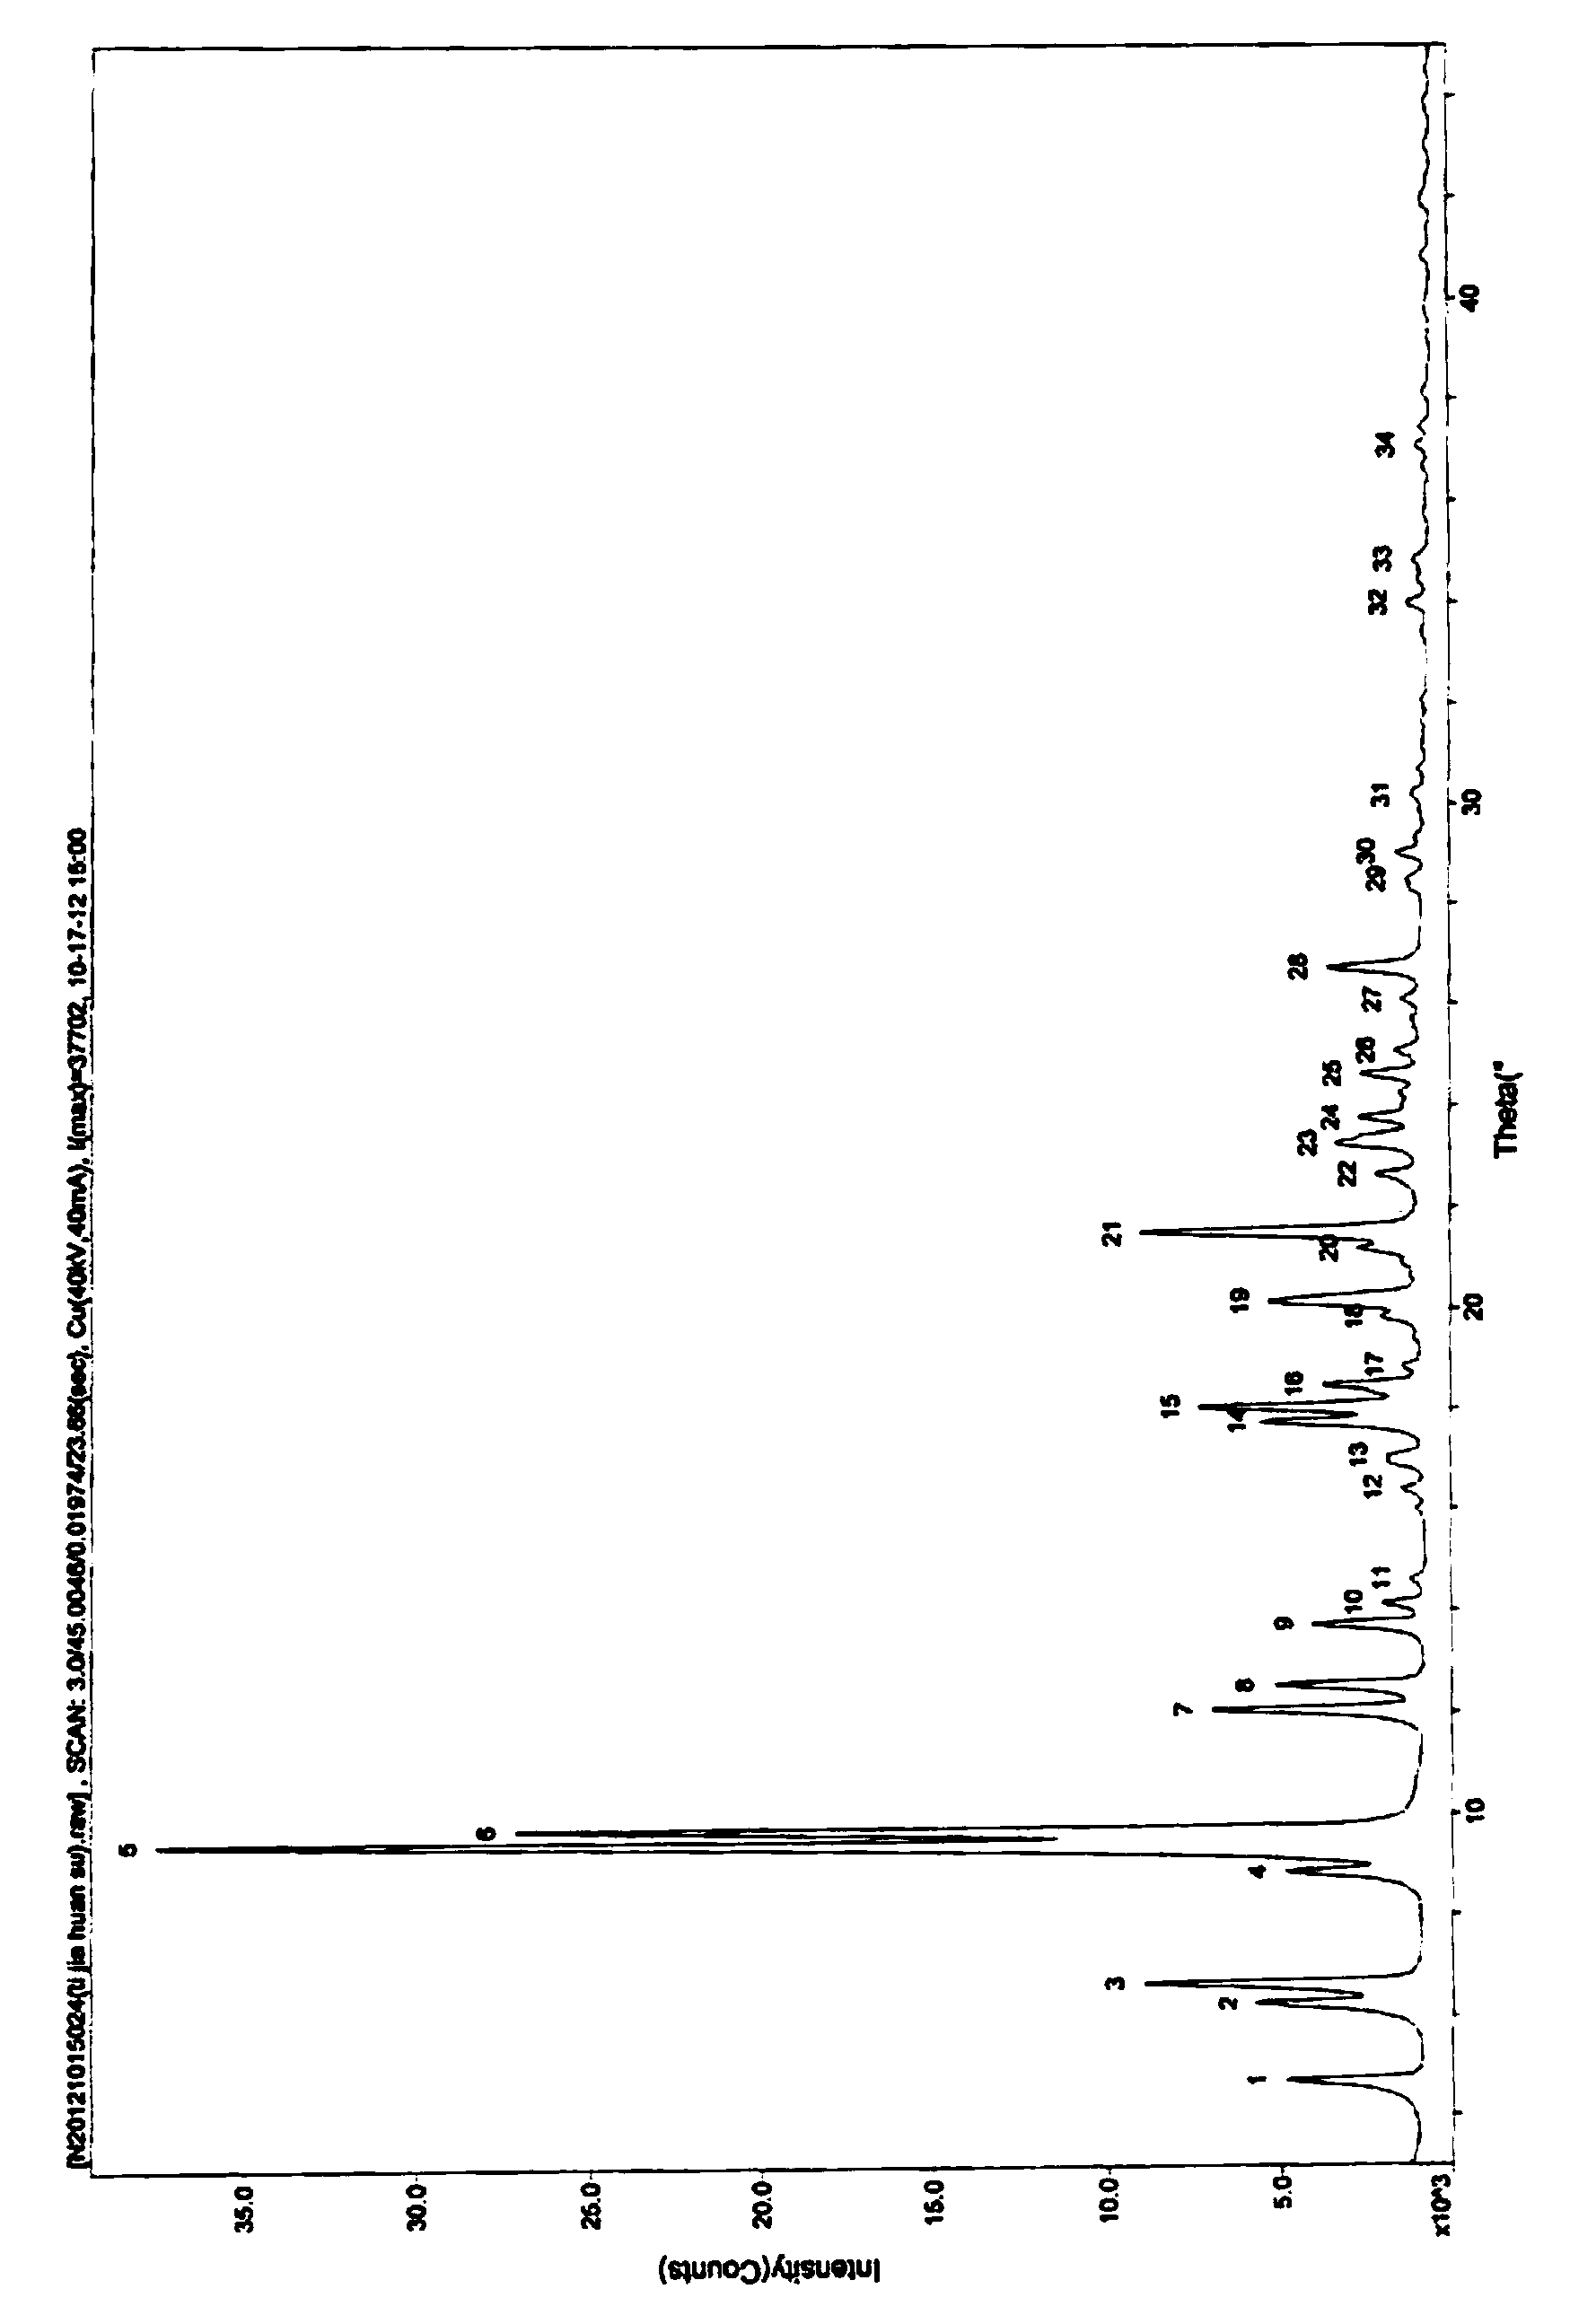 Ceftizoxime sodium compound crystal form, and preparing method and pharmaceutical preparation thereof